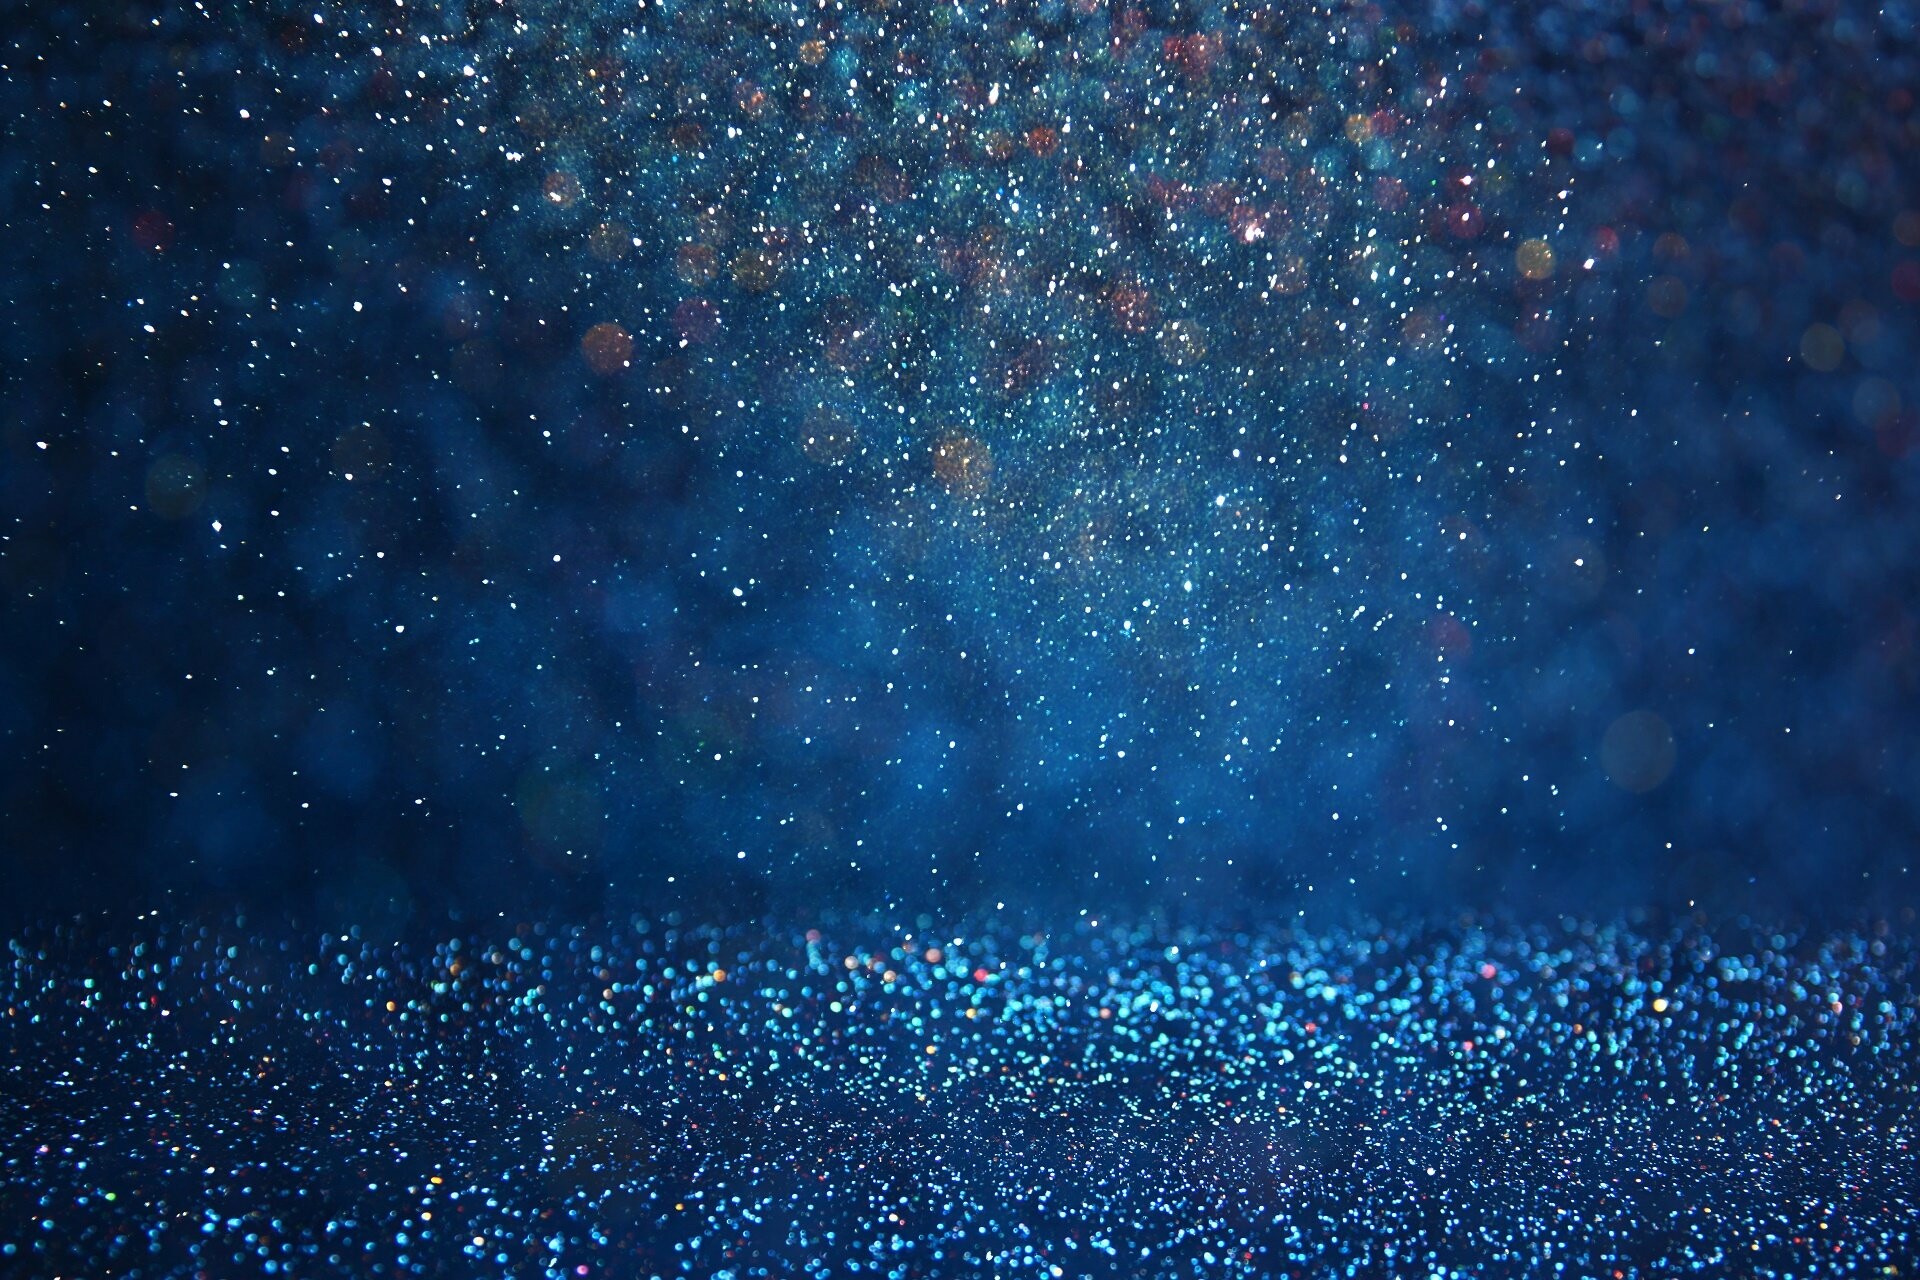 Sparkle: Glitter, Glowing, Colorful, Lights, Small particles. 1920x1280 HD Background.